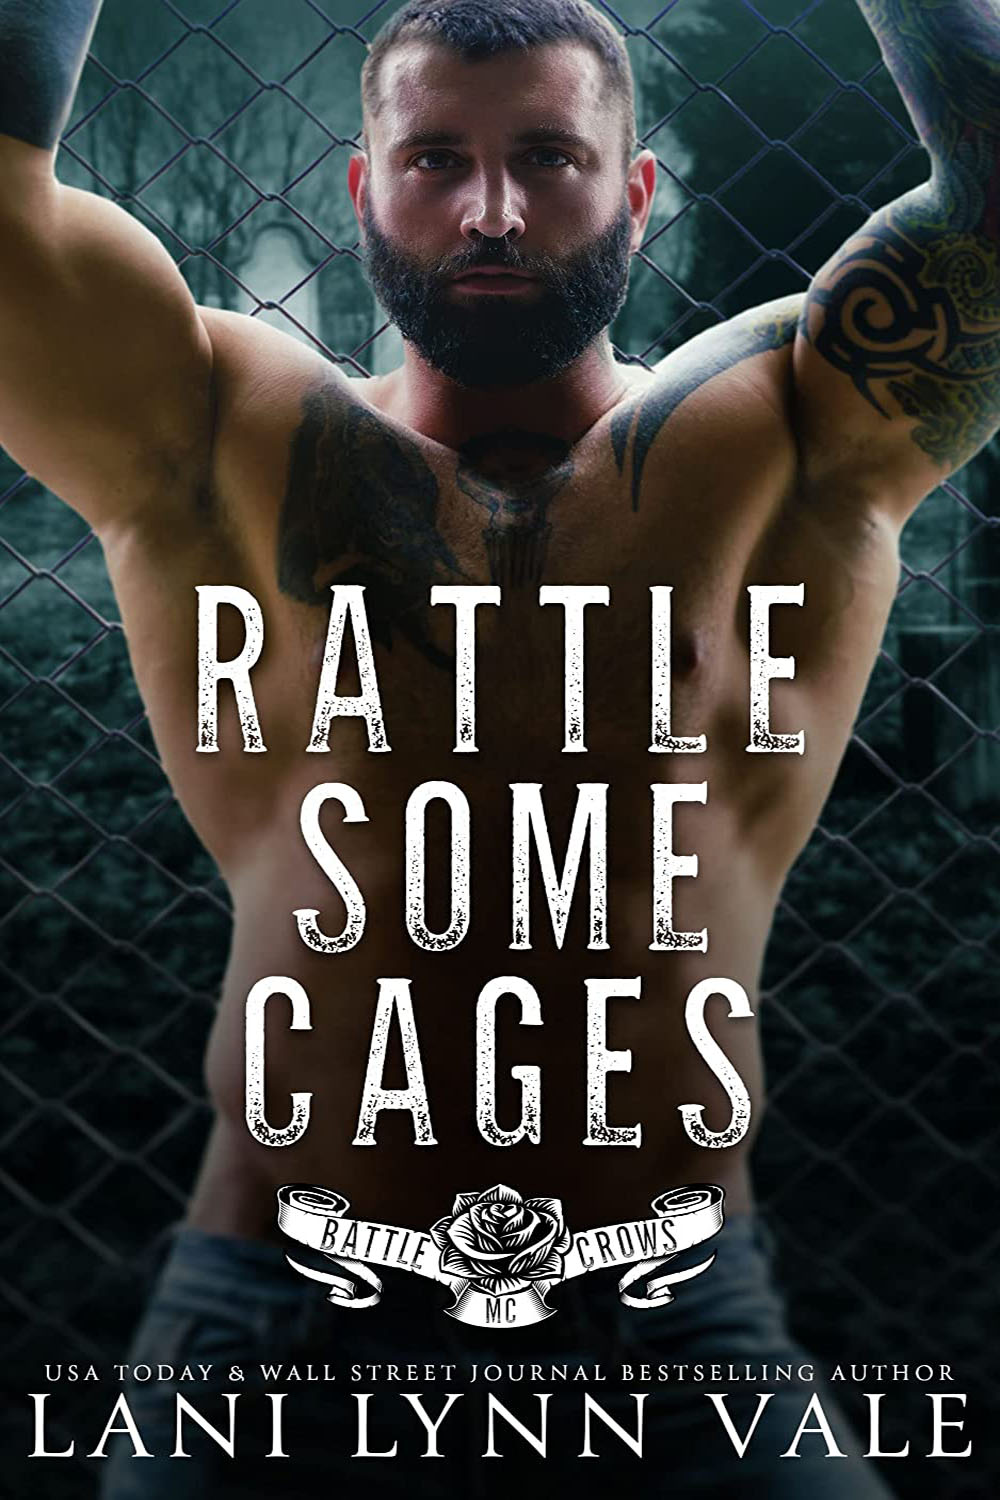 Rattle Some Cages (Battle Crows MC, Book 3)